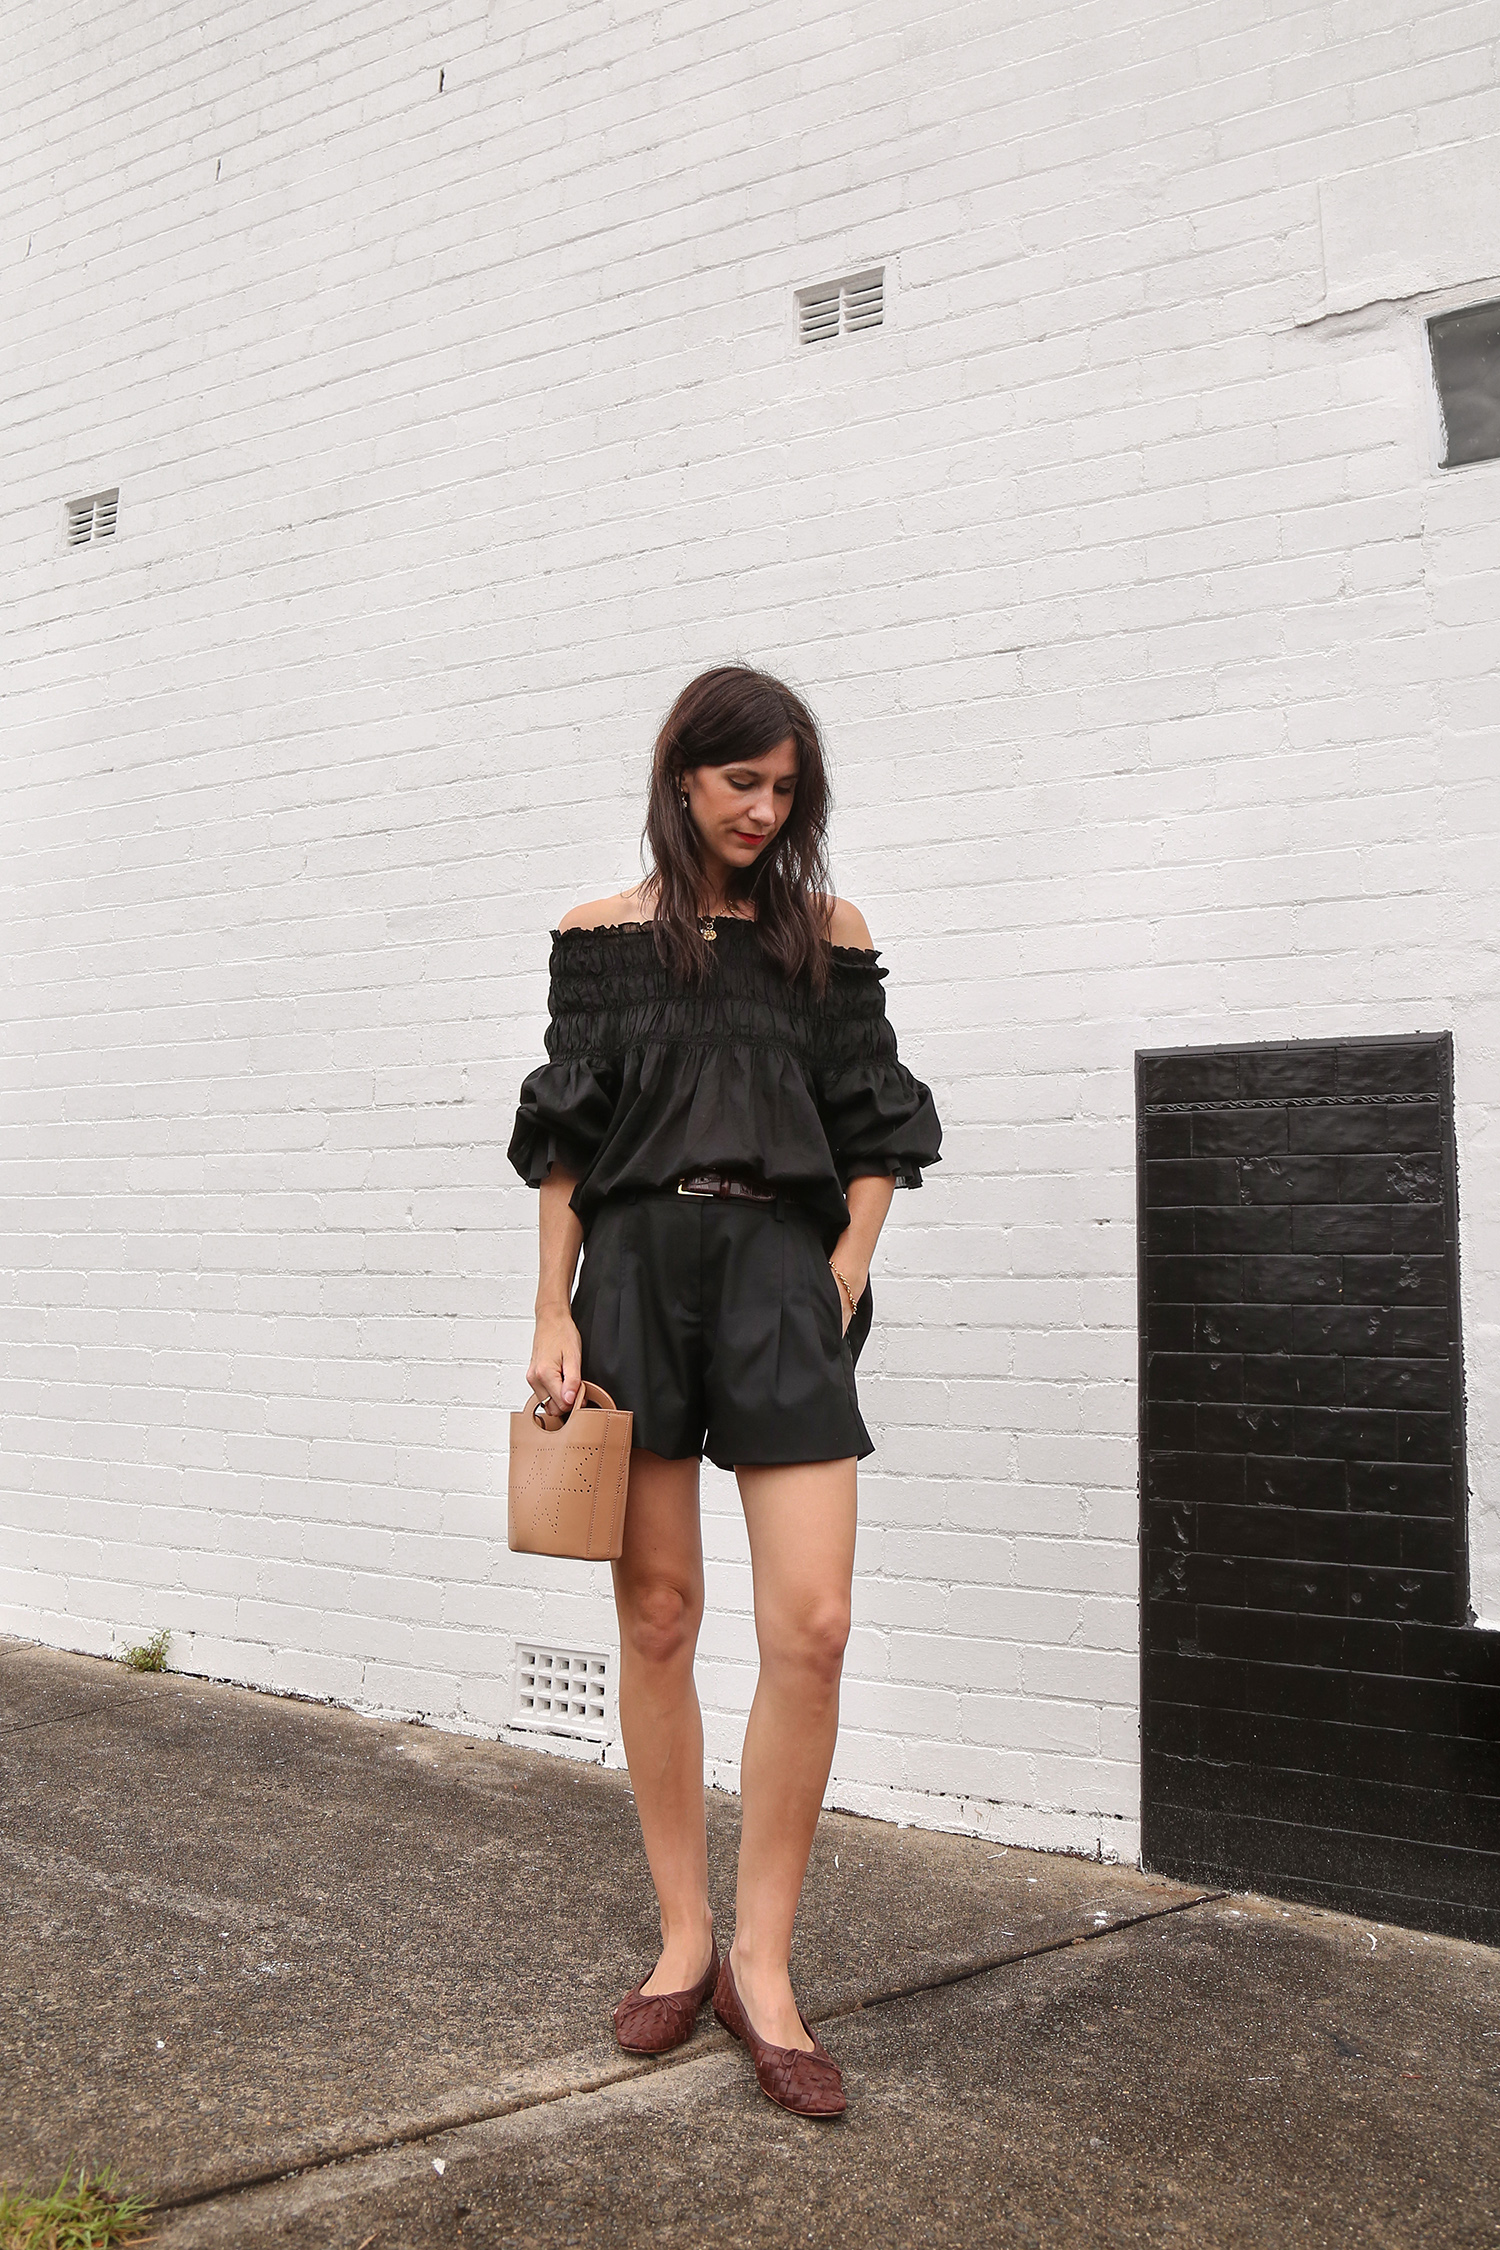 All black outfit wearing Karen Walker top with shorts and bag